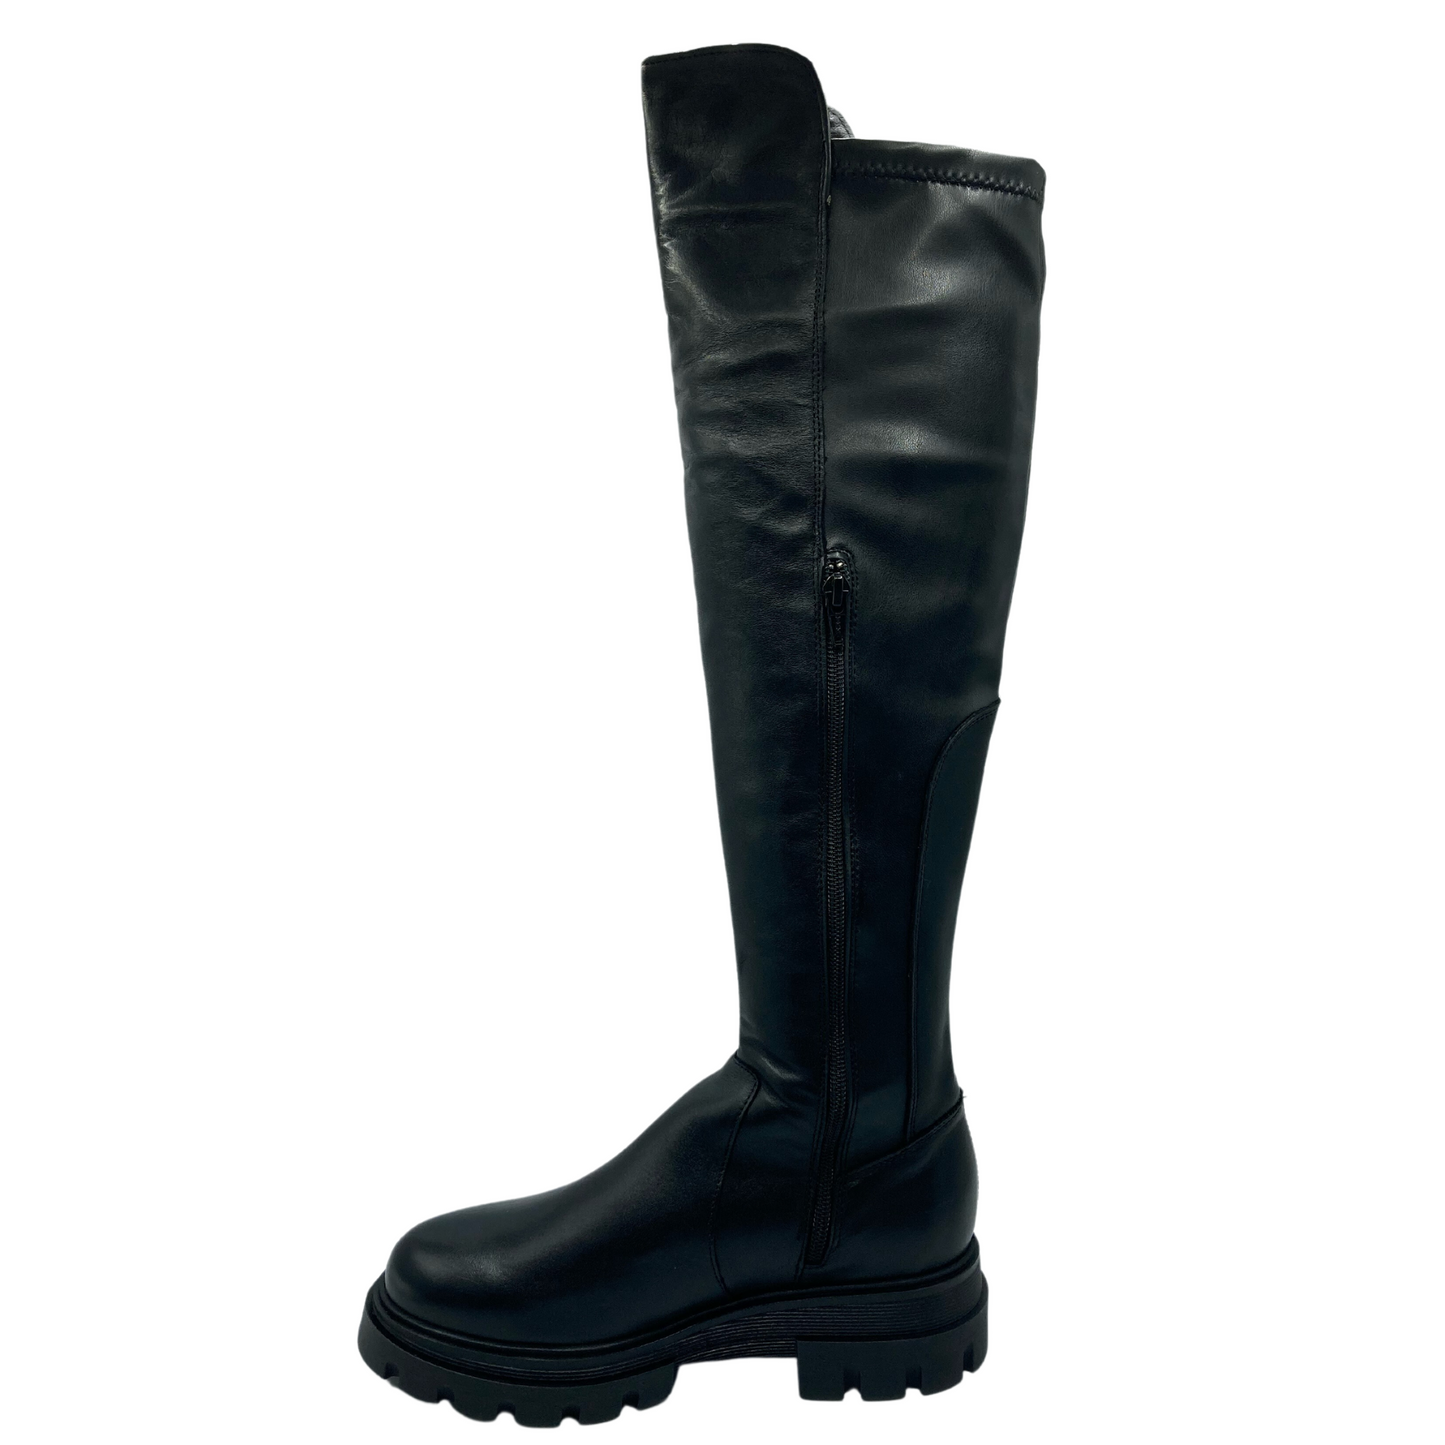 Left facing view of black leather thigh high boot with side zipper closure and rounded toe